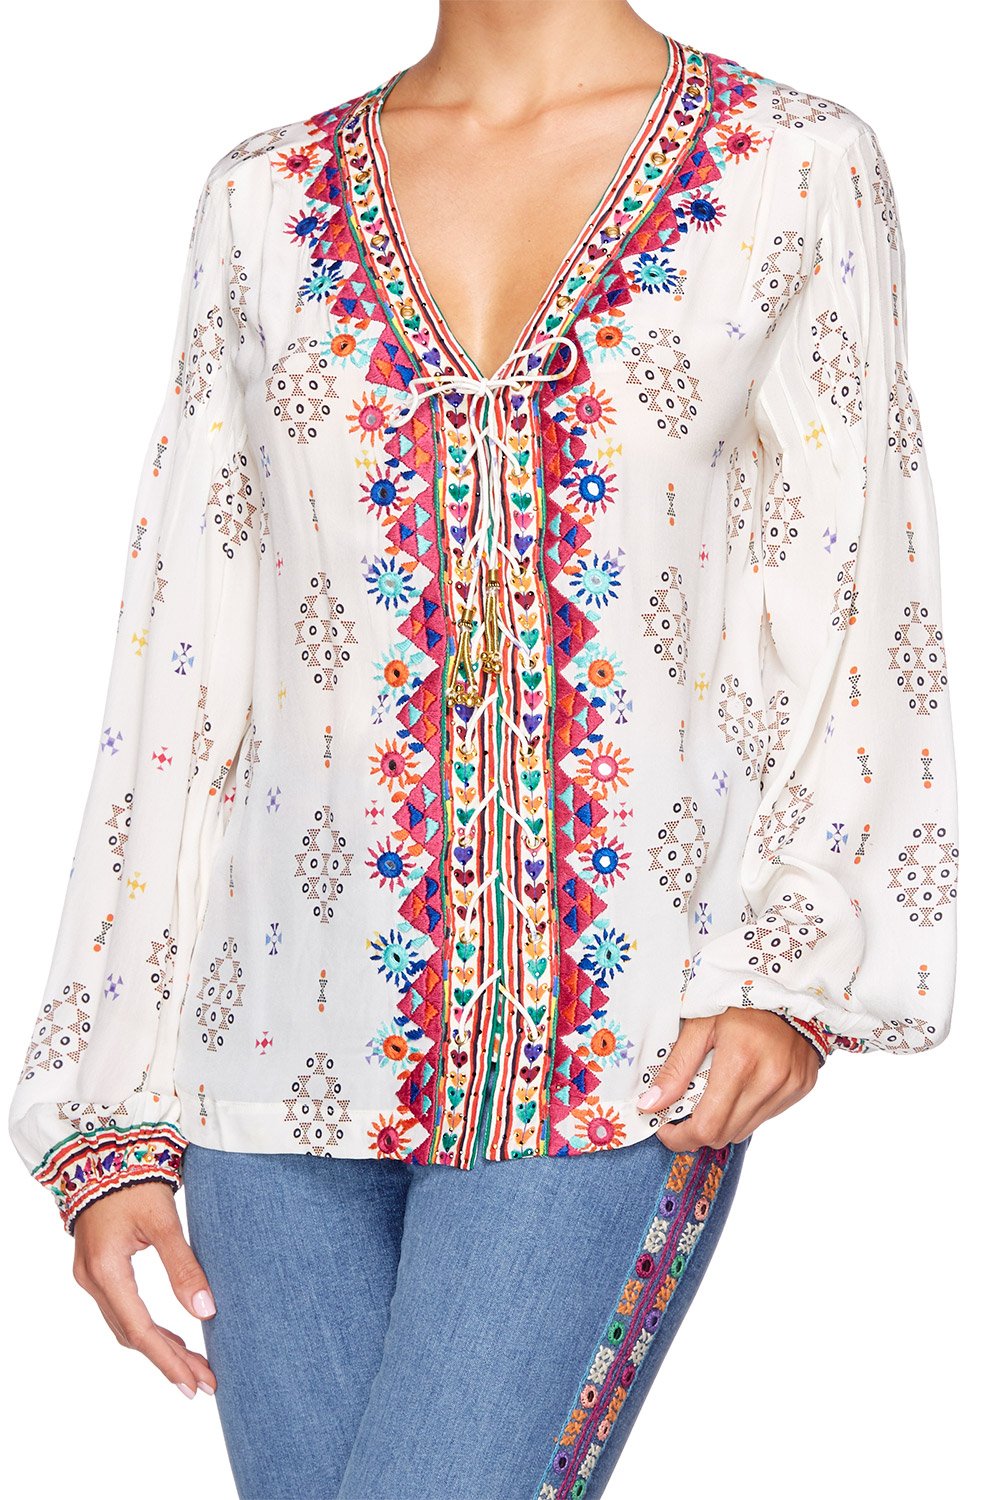 LOVE SONG PEASANT BLOUSE W FRONT LACING